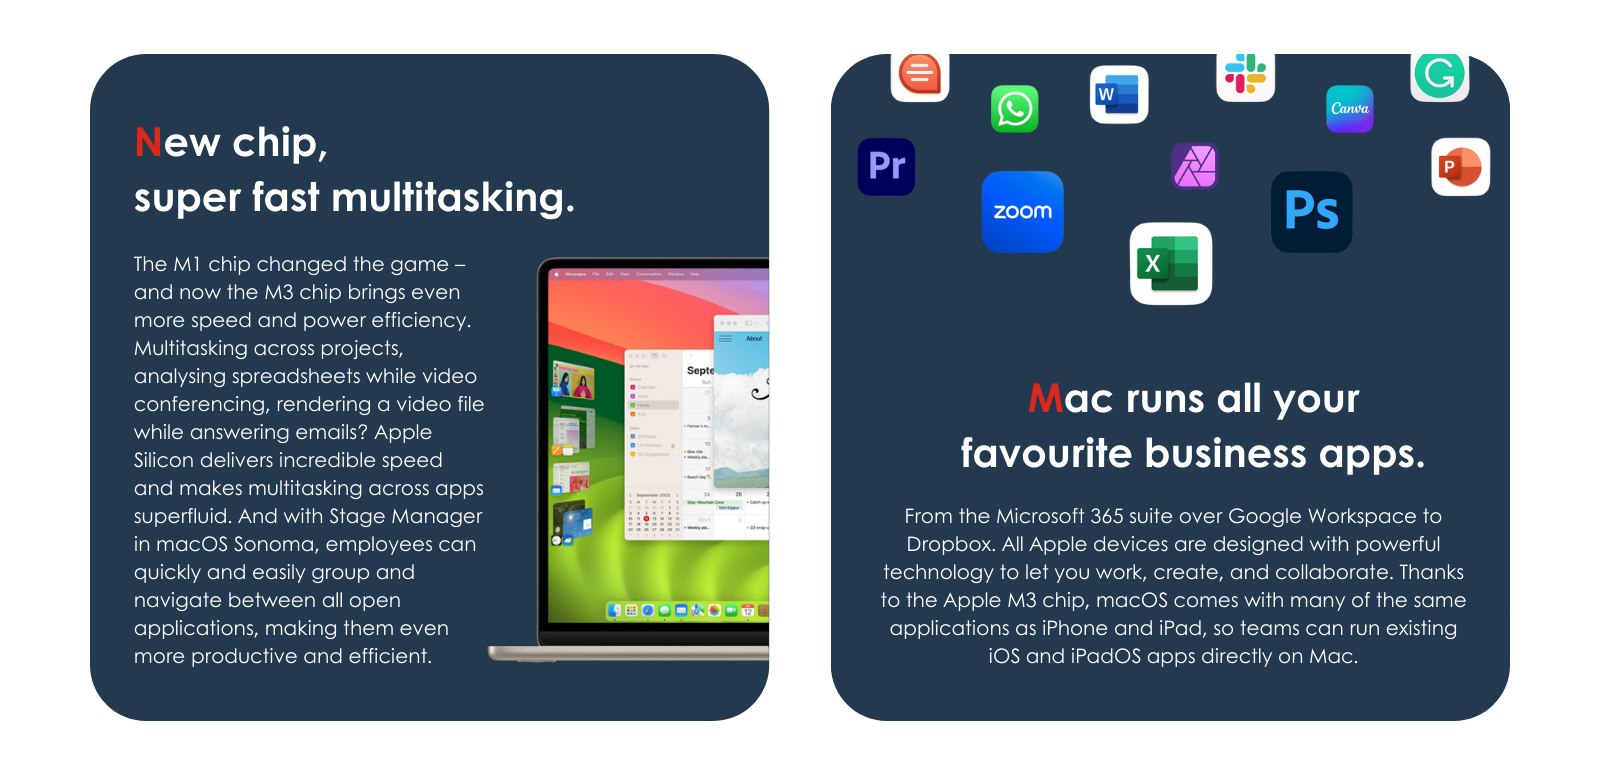 Mac Does That: Multitasking + Business Apps